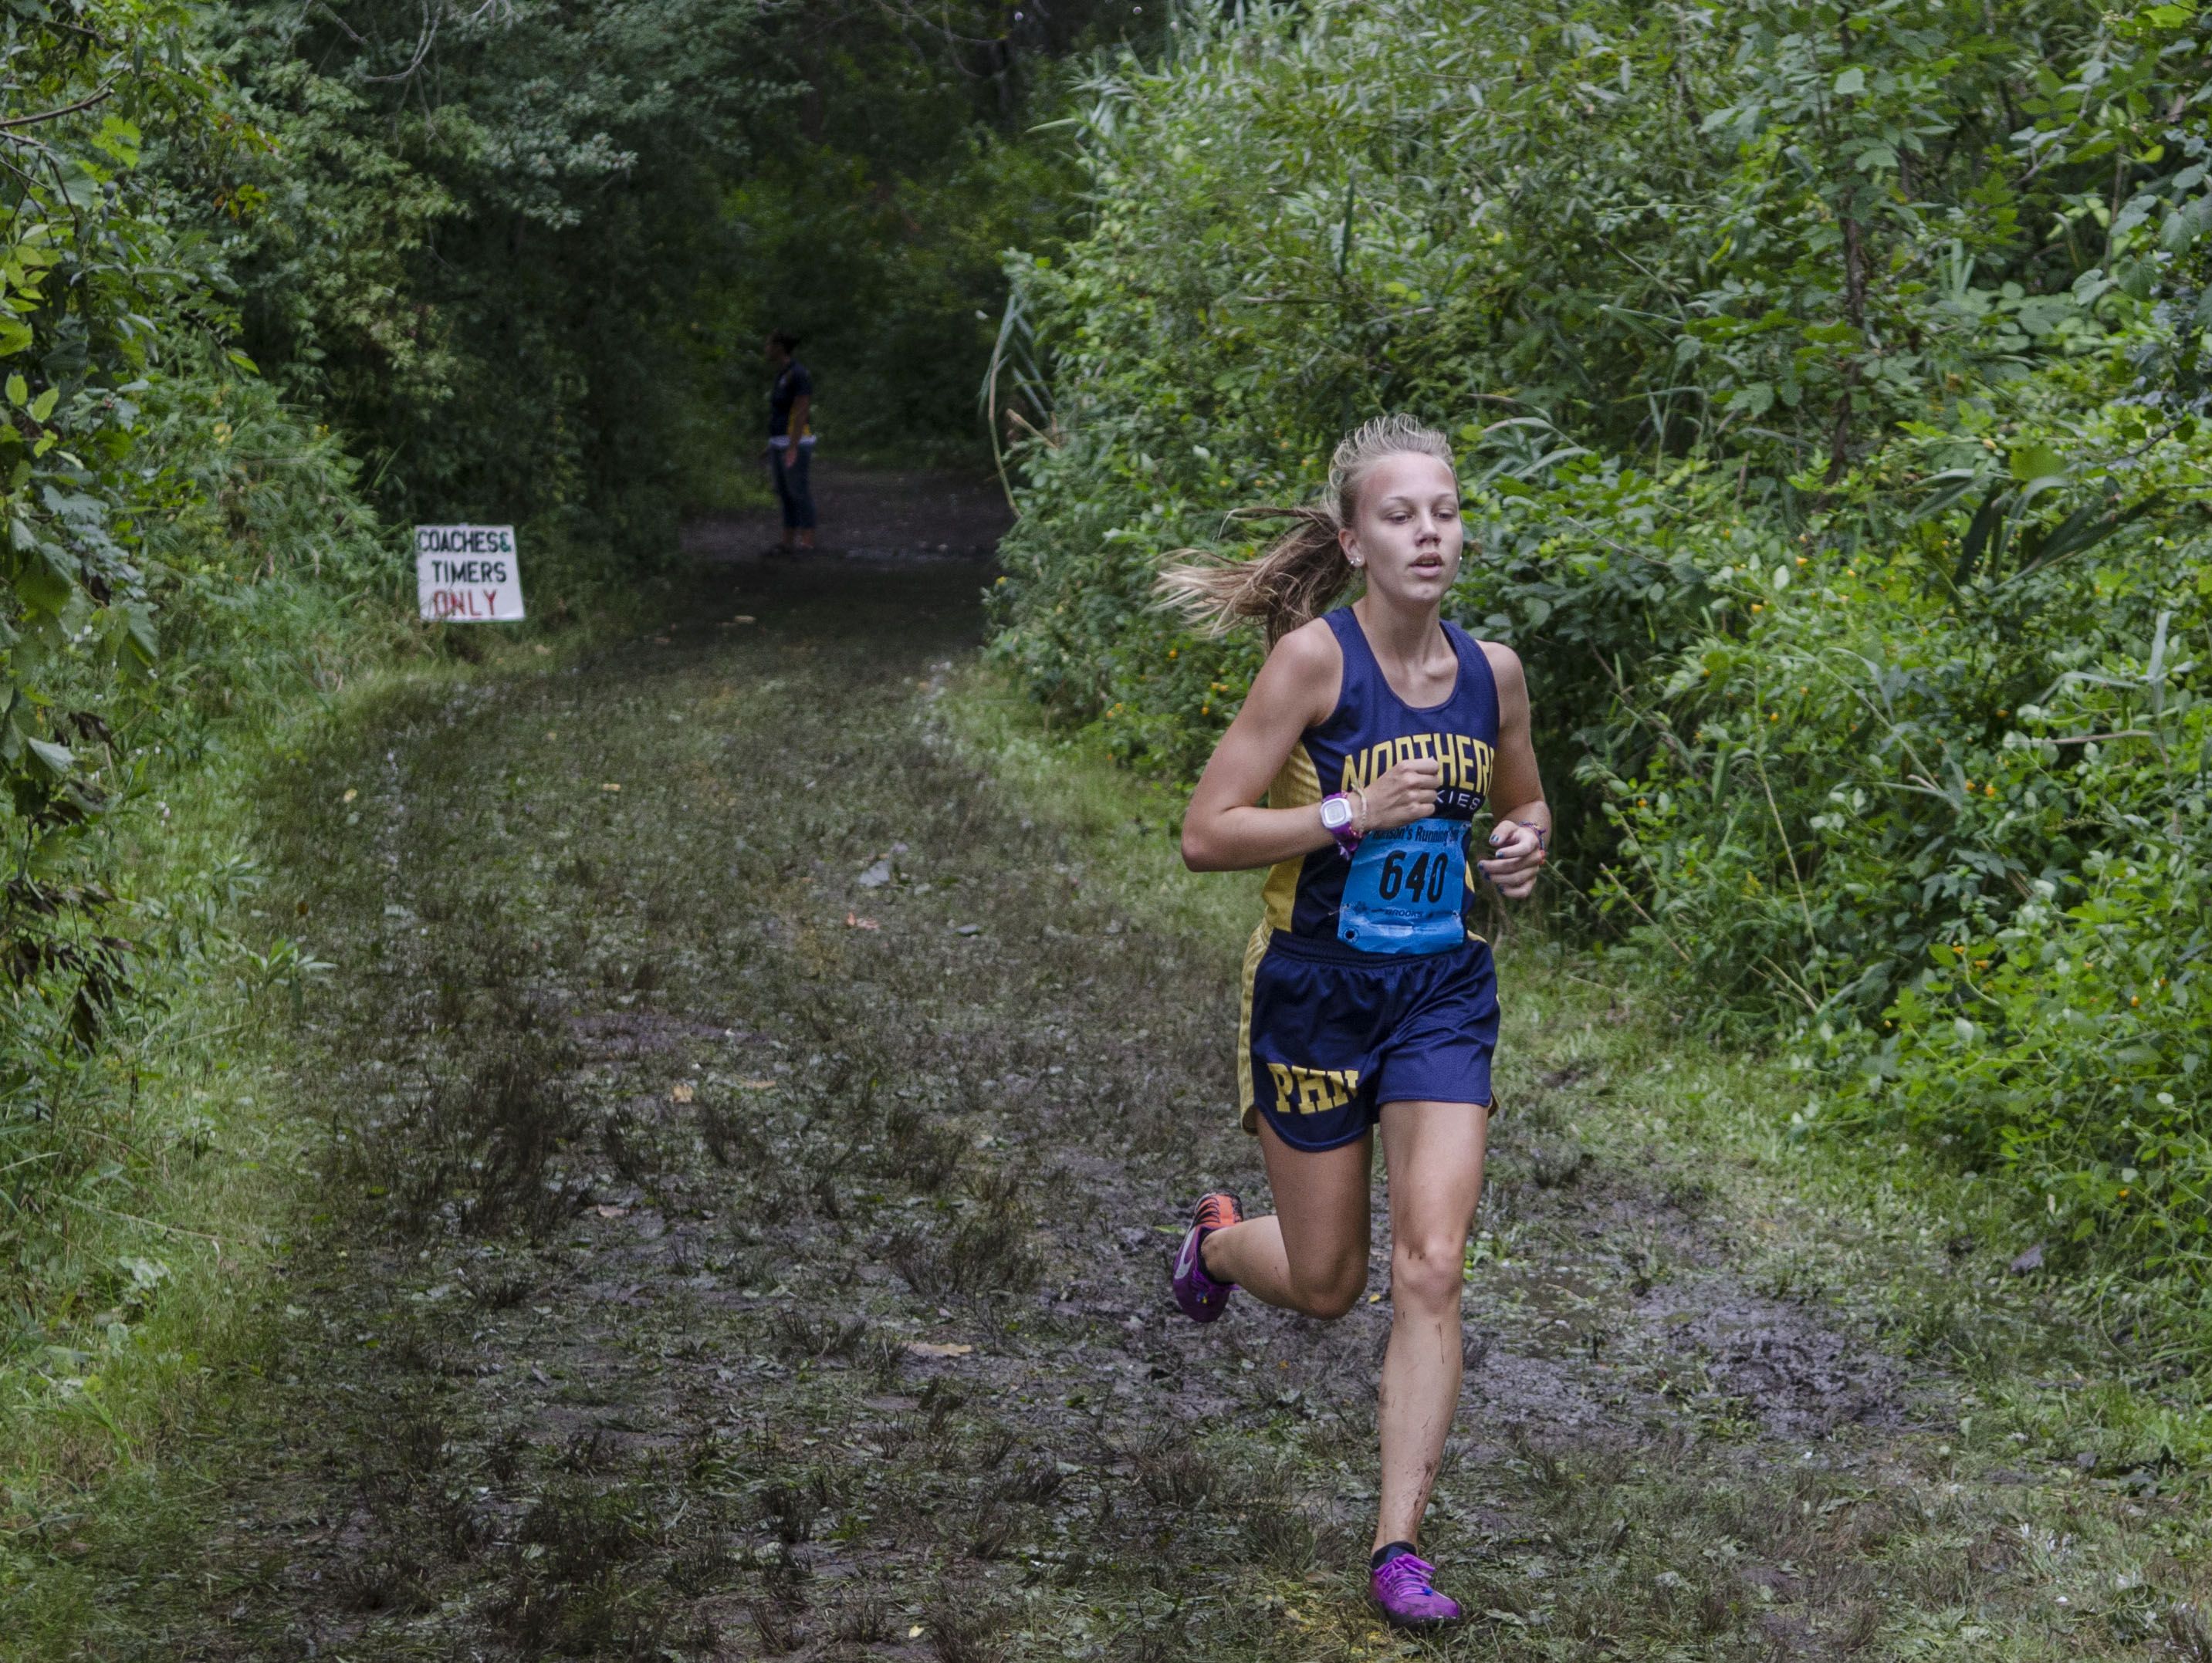 Port Huron Northern's Ashley Defrain runs out of the wood loop in front of the pack in the Division I race Saturday, Sept. 10 at the Algonac Muskrat Cross Country Classic at Algonac High School. Defrain finished in first place with a time of 19:46.